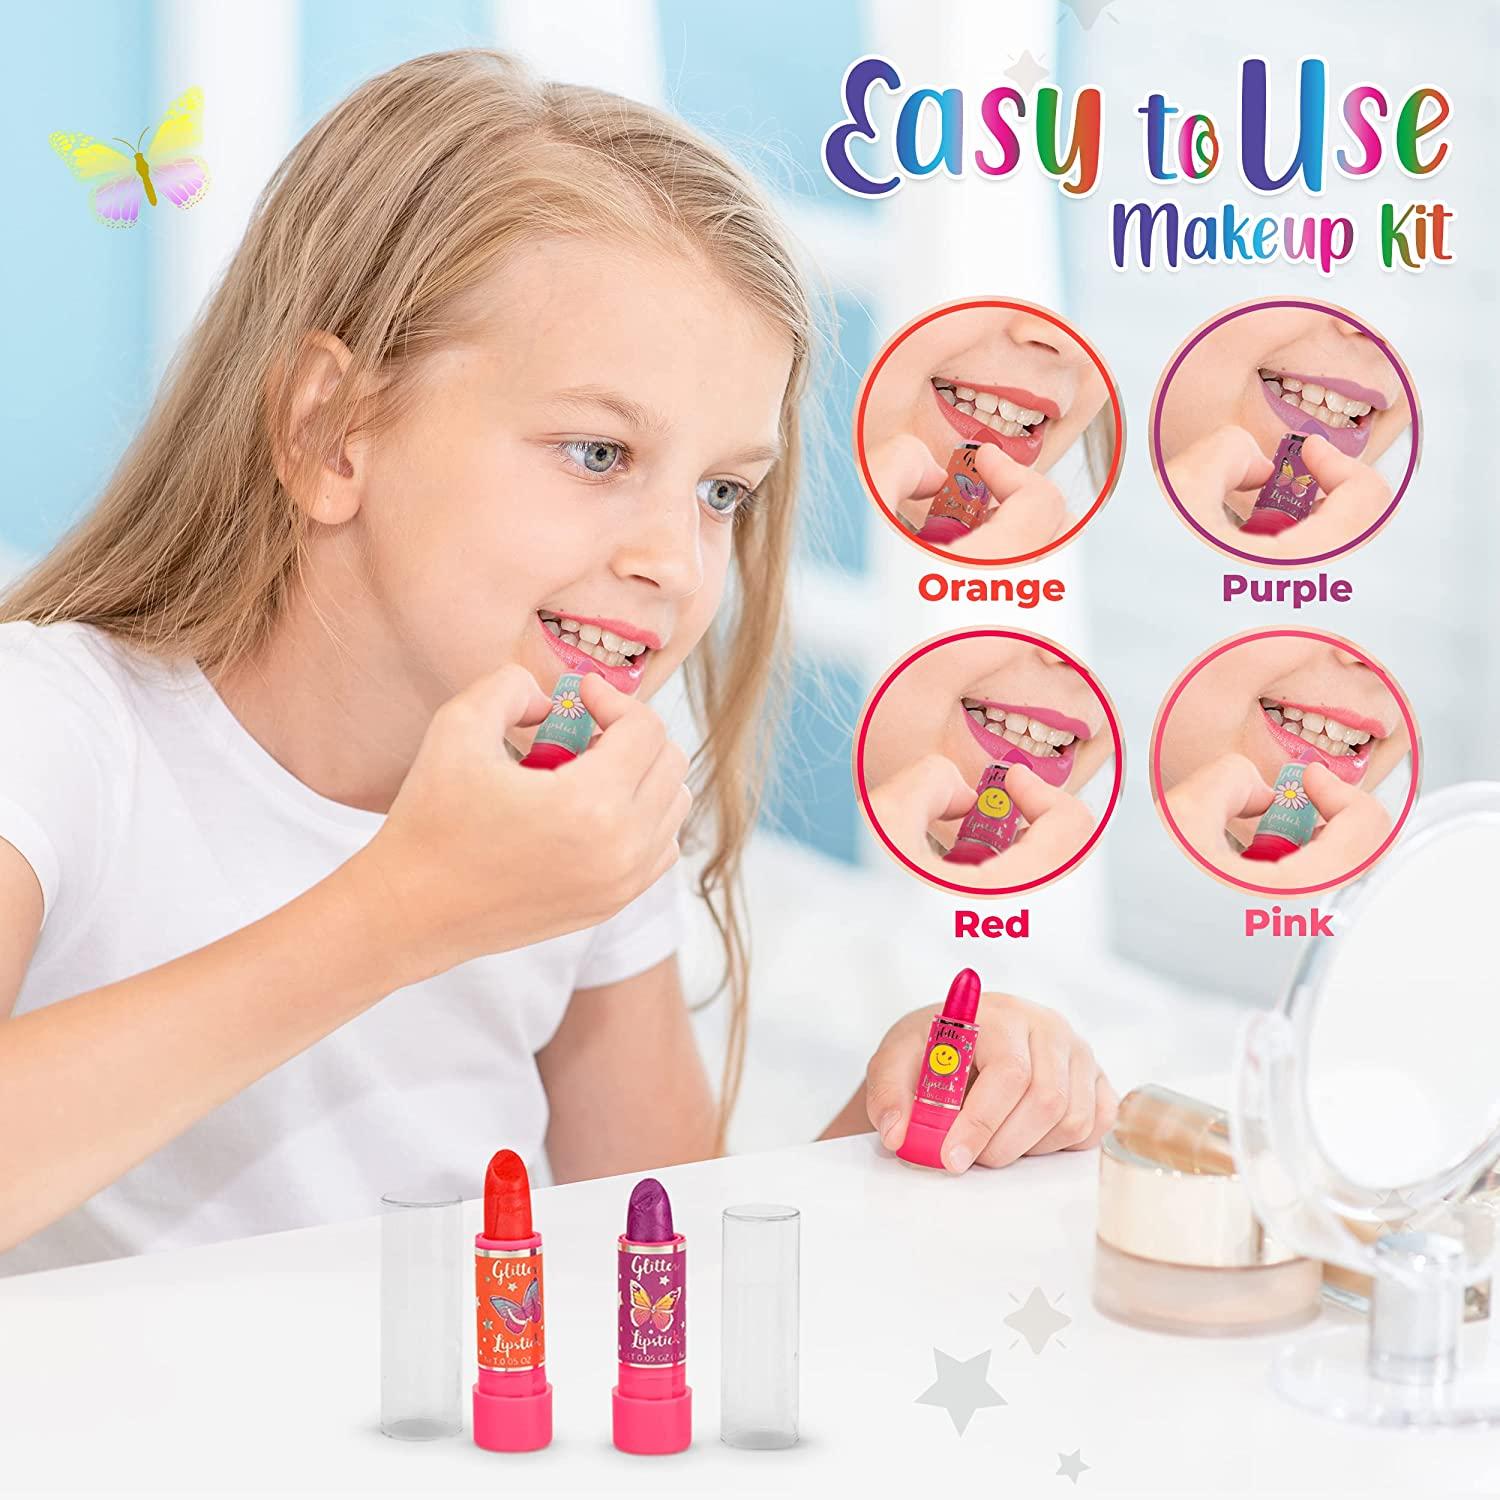 Hot Focus Makeup Kit for Girls with 4 Kids Lipsticks & Glitter Eyeshadow  Palette - Kid Friendly, Washable Beauty Kit - Pretend Play Make Up Set -  Cosmetics Gifts for Little Girls (Applicator Included) Flower